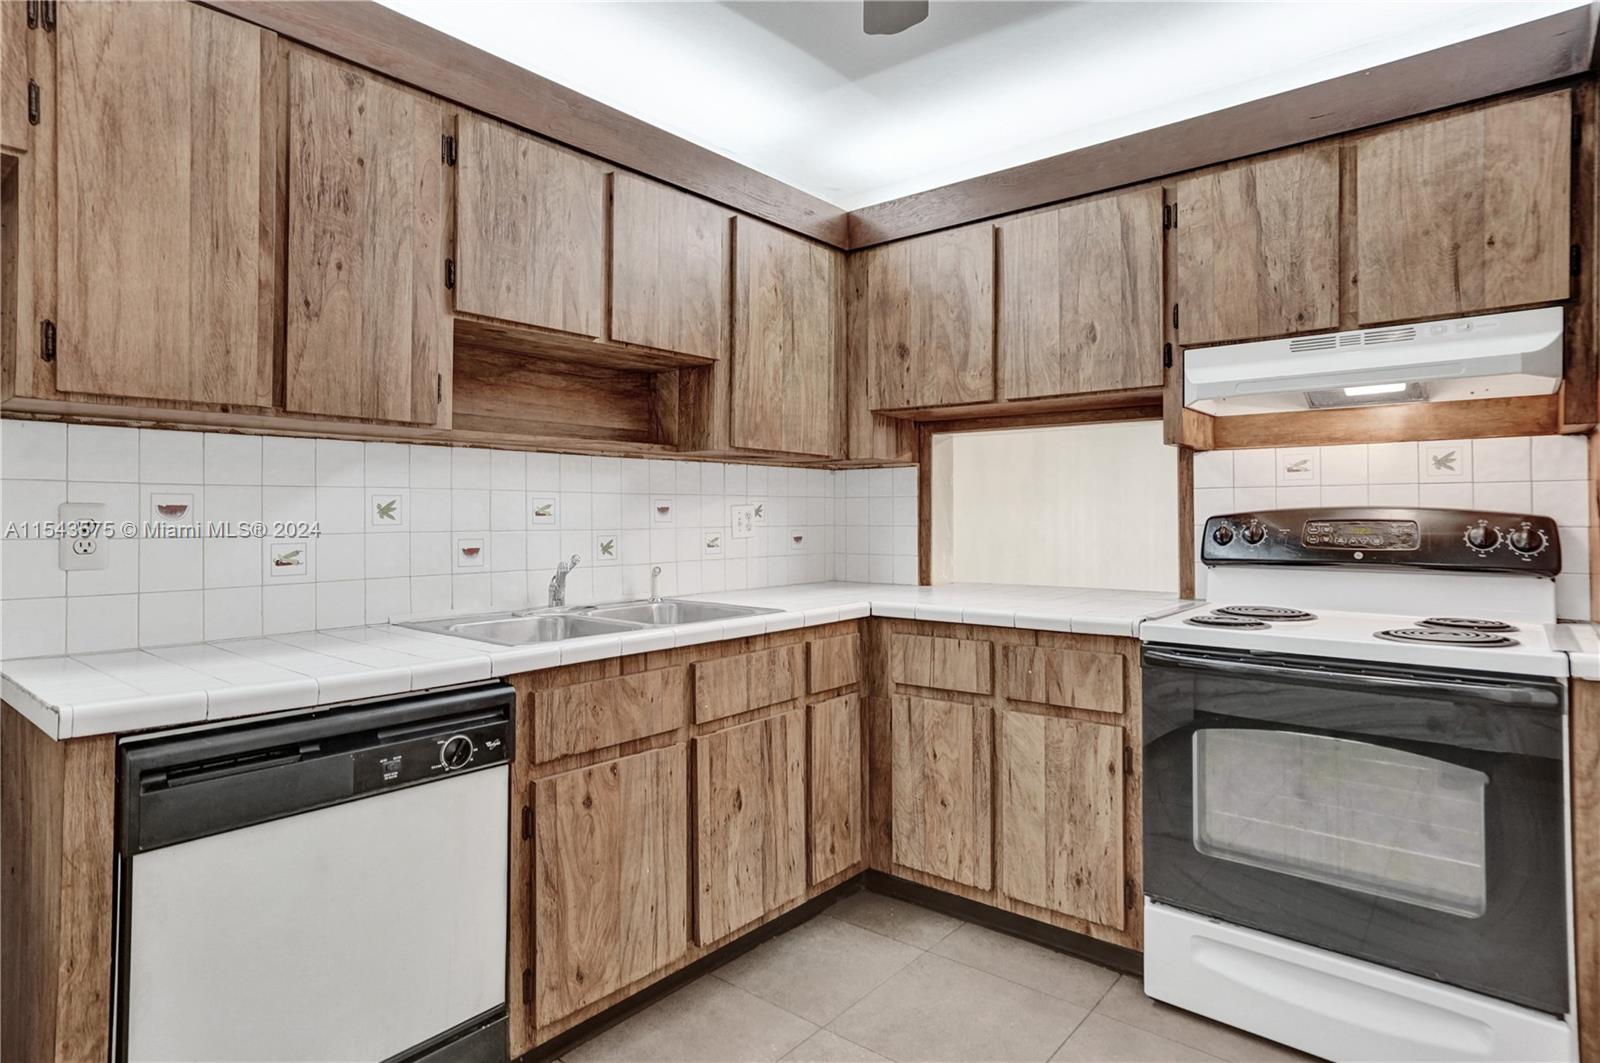 a kitchen with granite countertop wood cabinets stainless steel appliances and sink